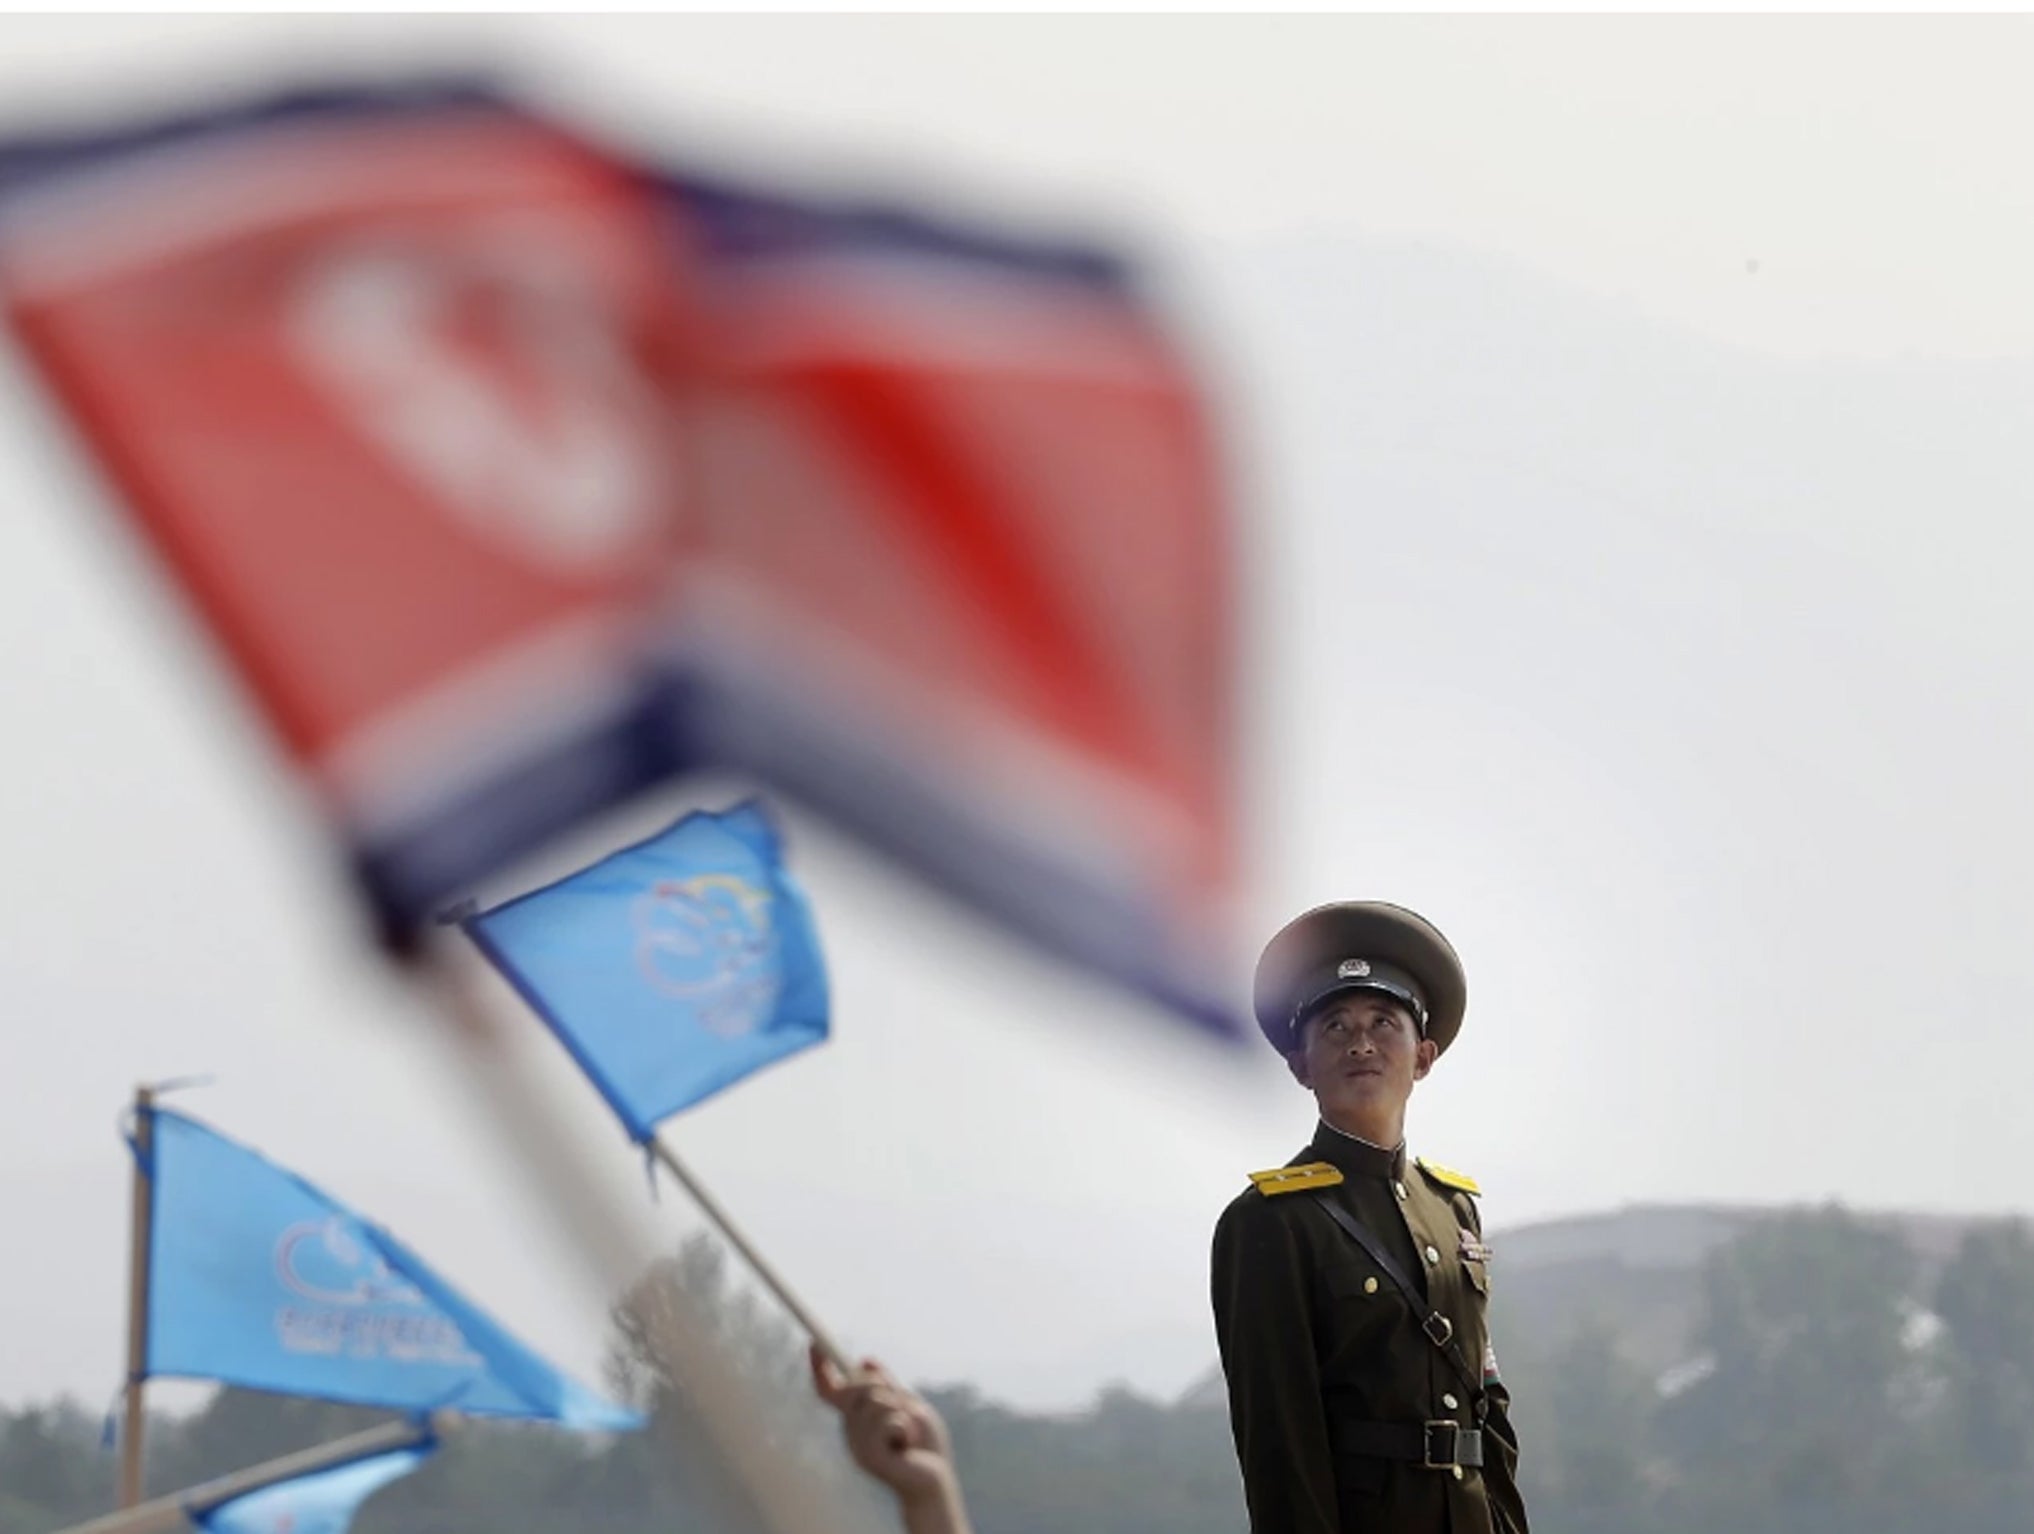 A North Korean military soldier stands guard on Sept. 24 during an air festival in Wonsan, North Korea